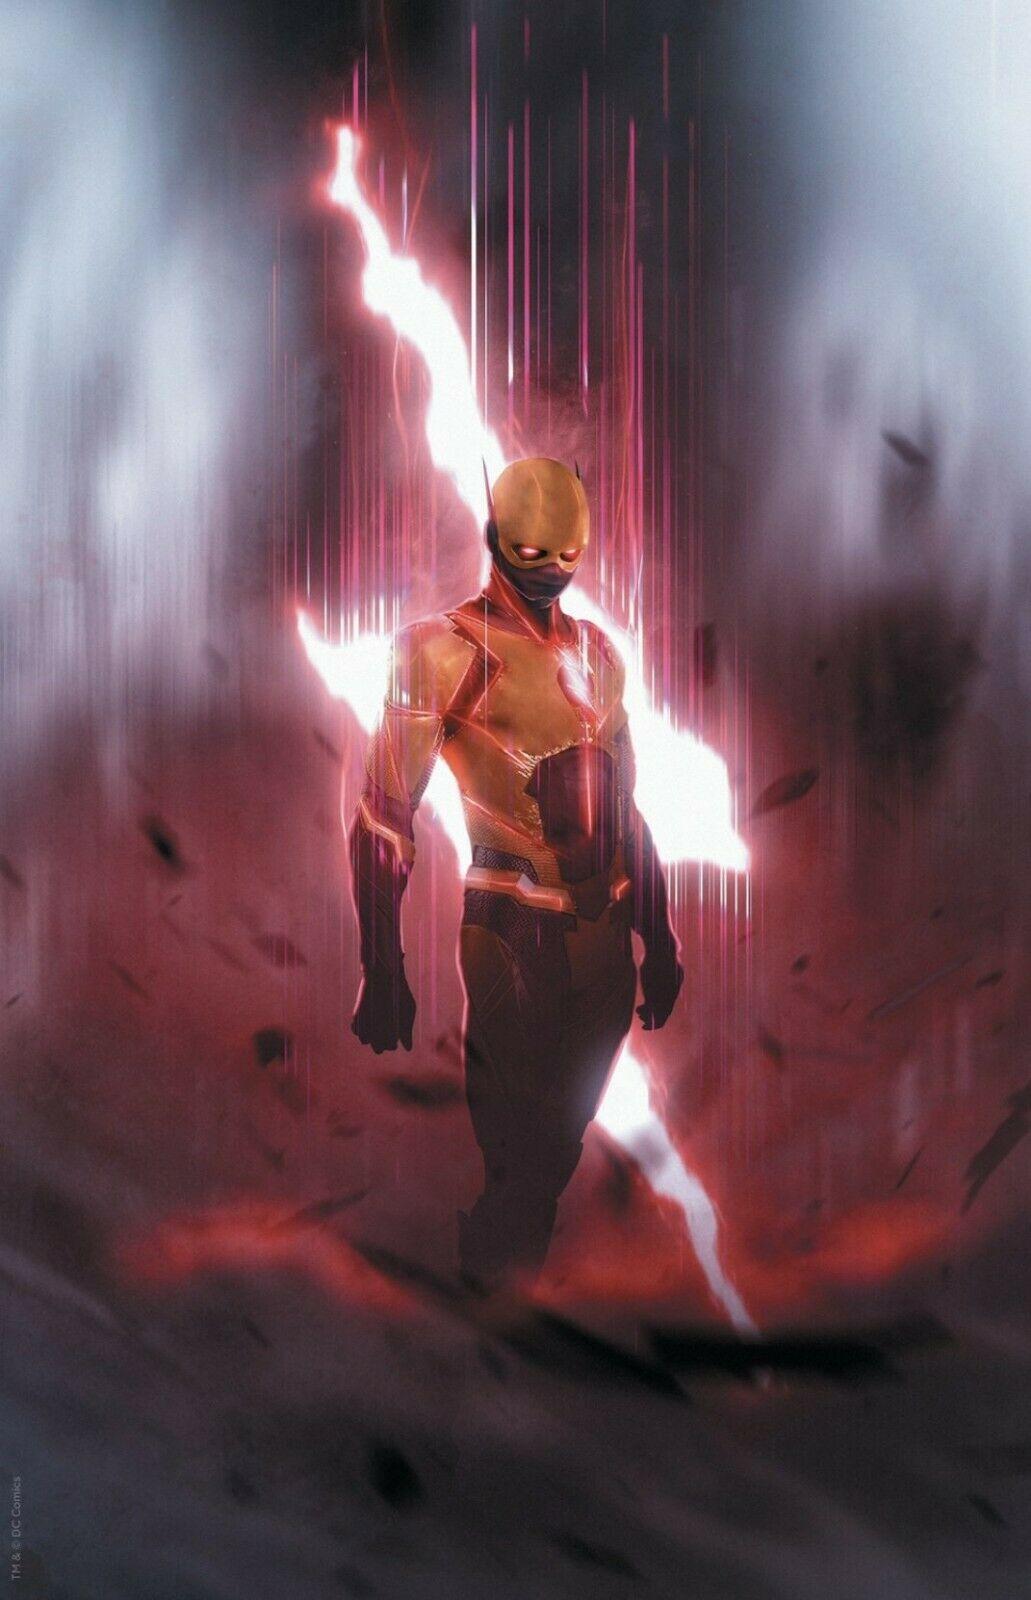 THE FLASH #750 BOSSLOGIC COVER SET - The Comic Construct